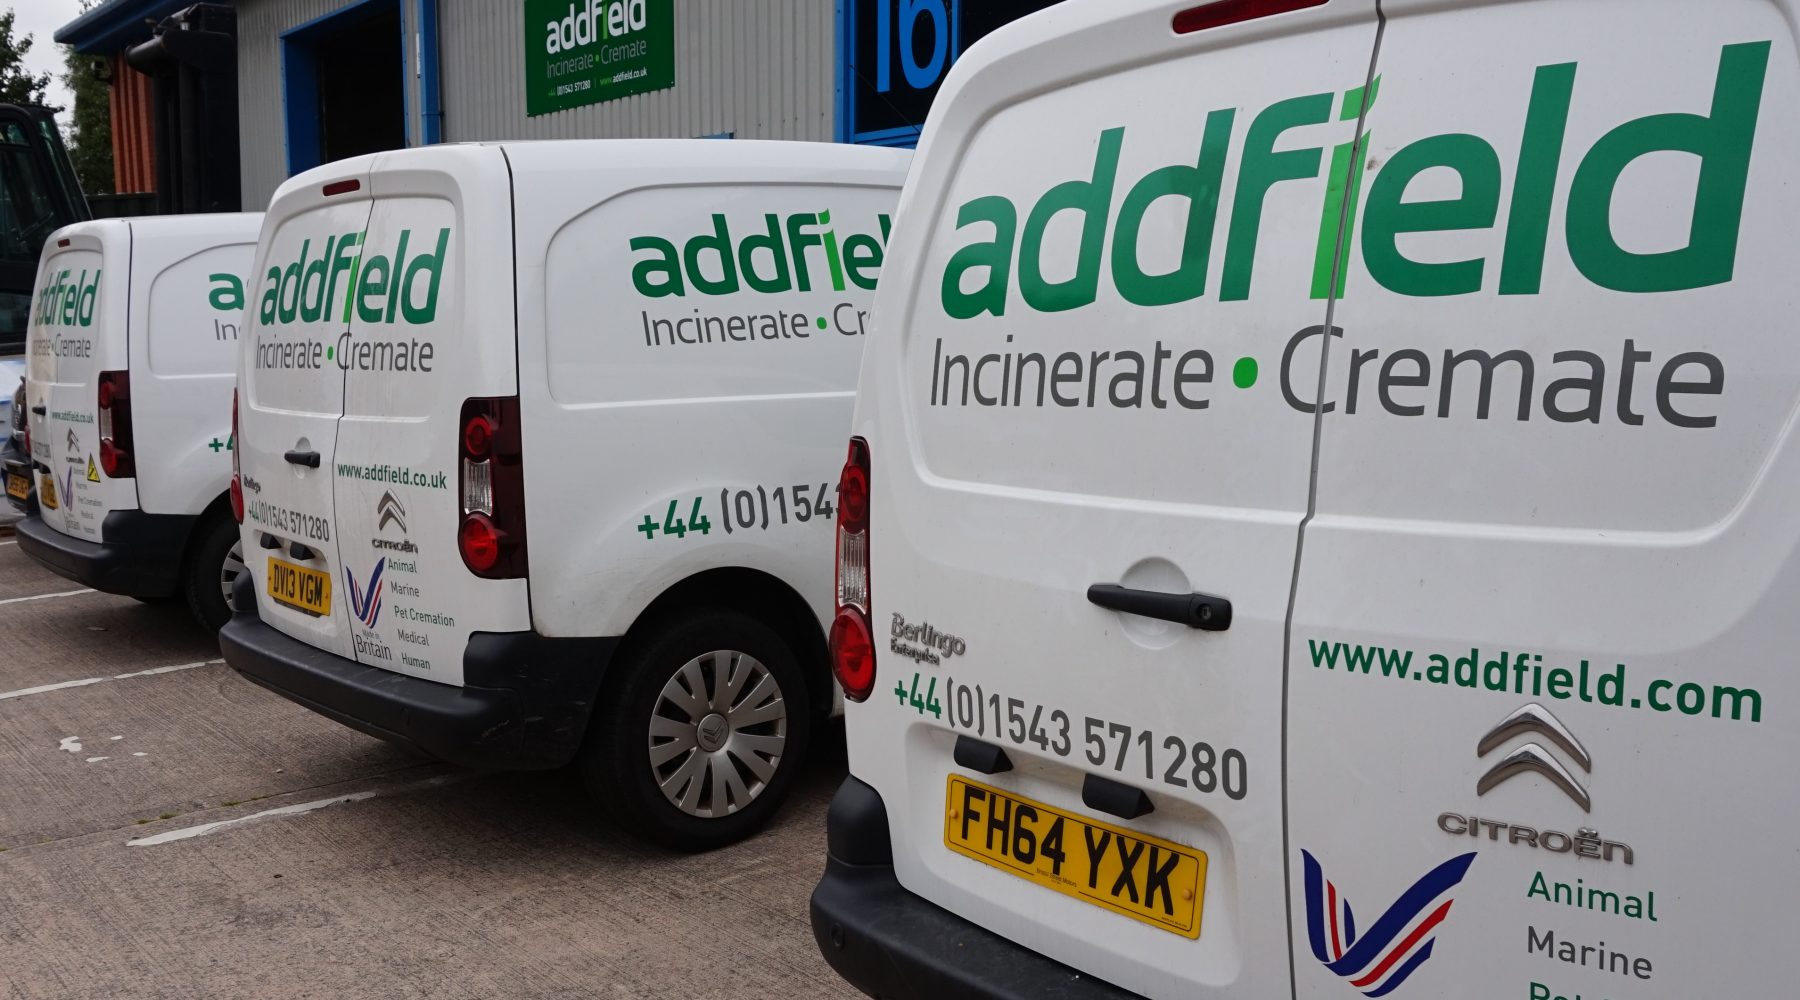 Quality Control & Customer Service Is Paramount to Addfield